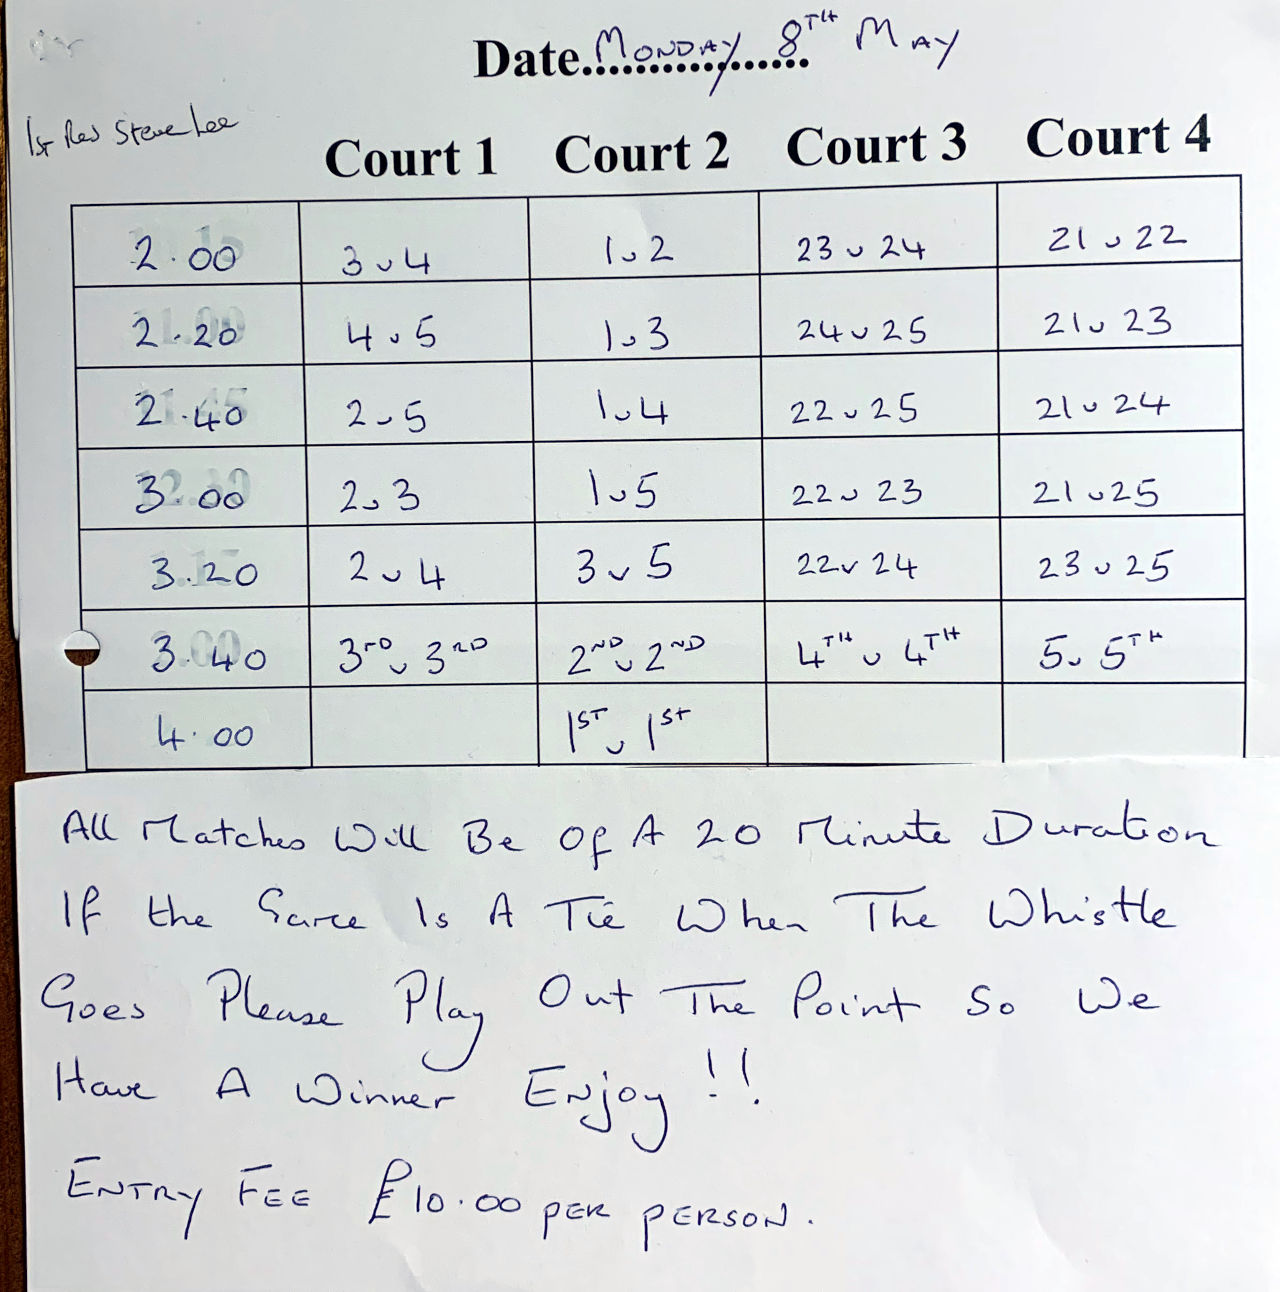 Bank Holiday Monday Racketball Doubles schedule